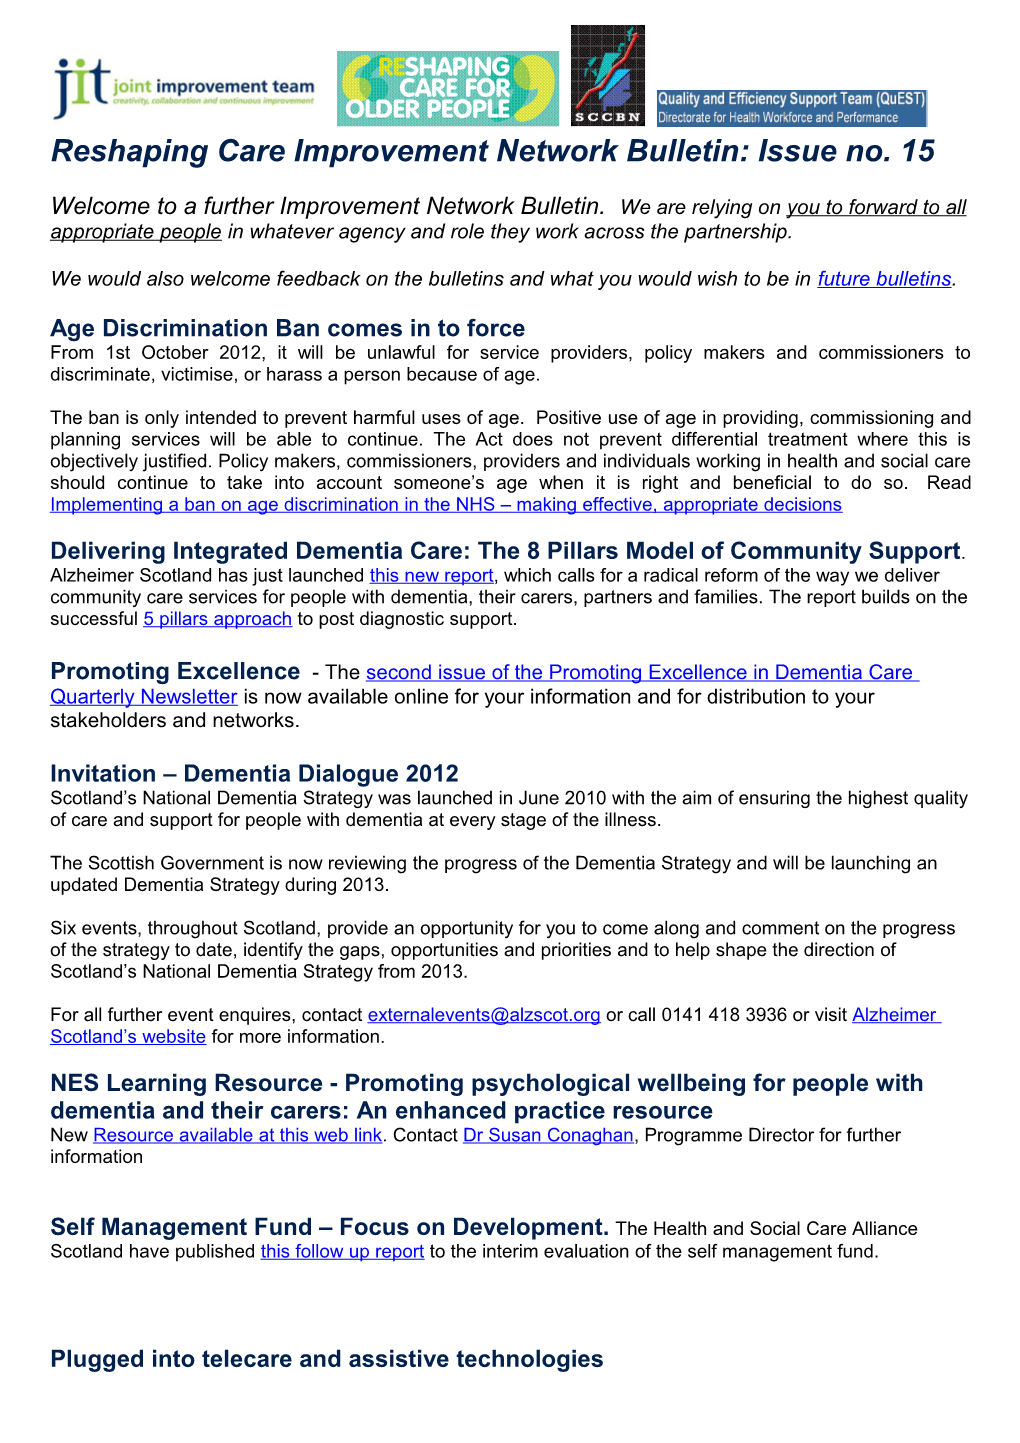 Reshaping Care Improvement Network Bulletin: Issue No. 15